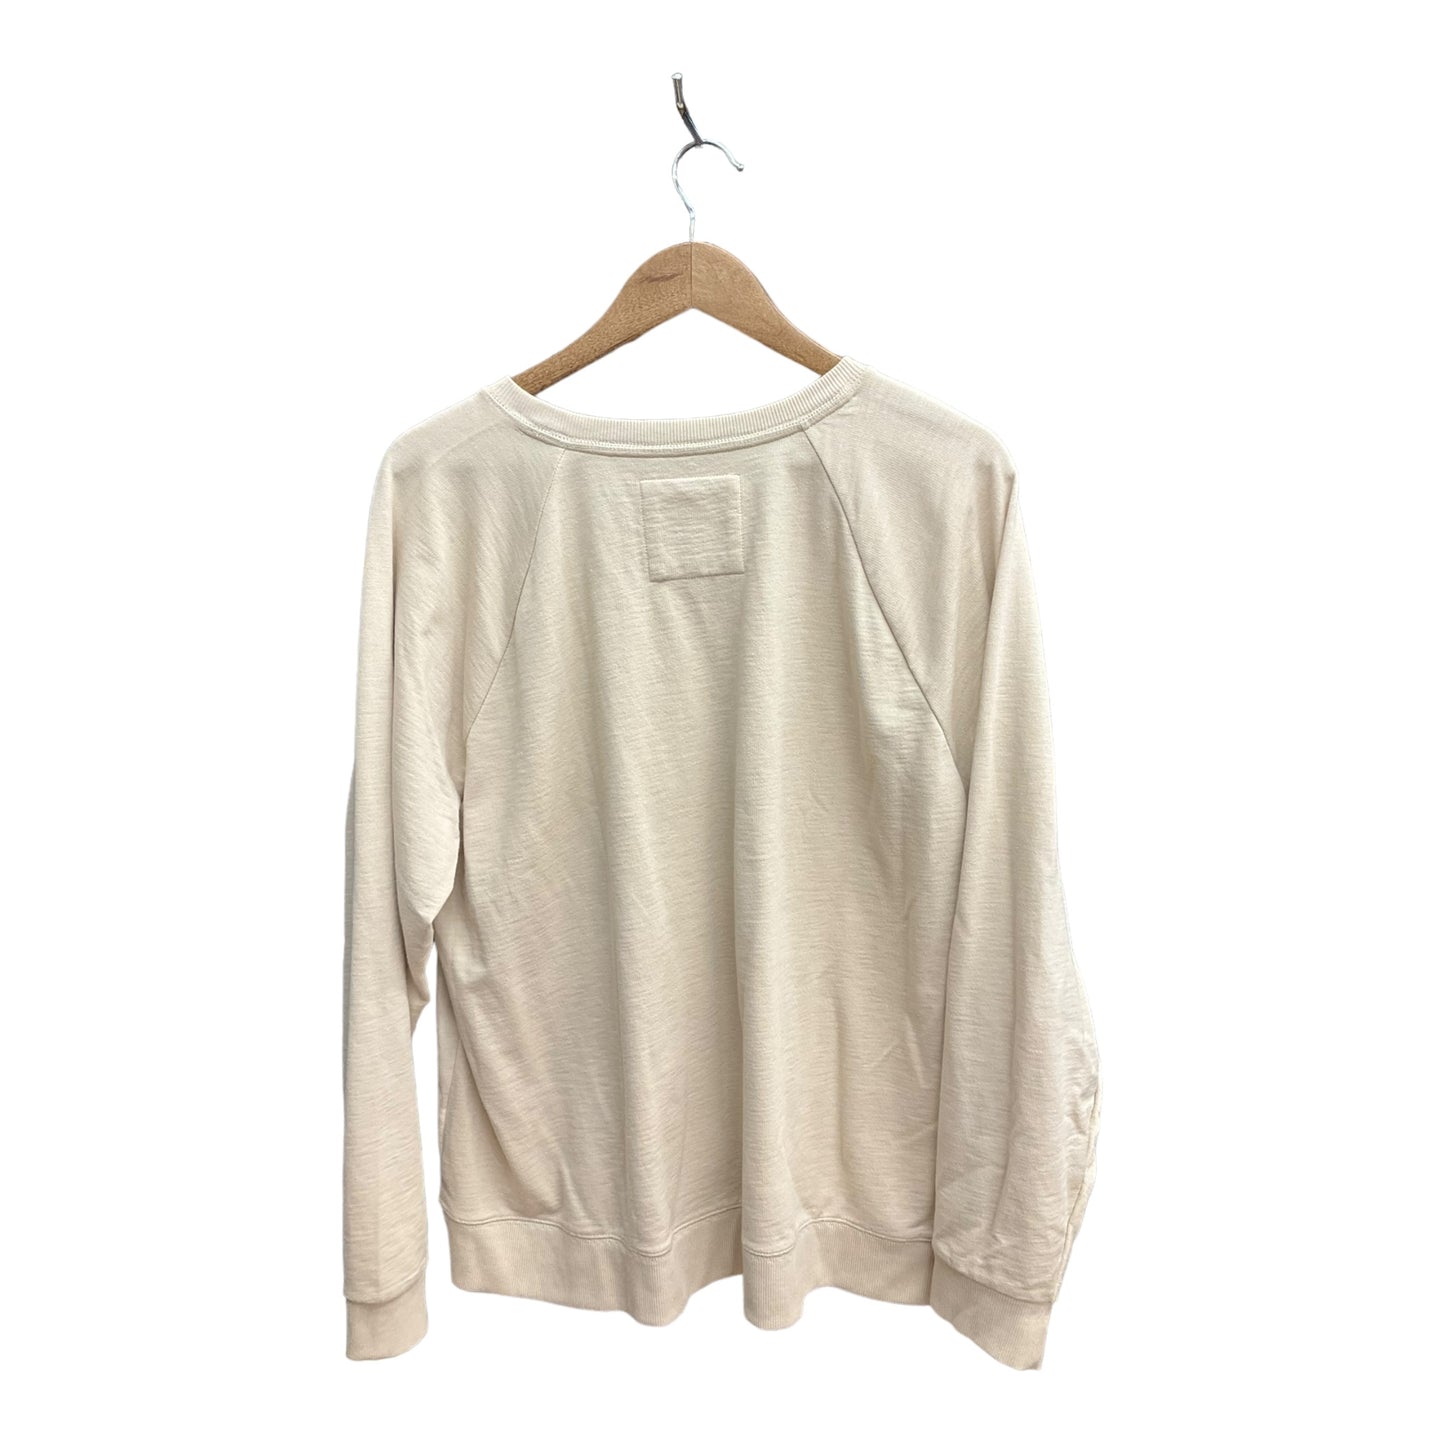 Top Long Sleeve By Sonoma O  Size: Xxl